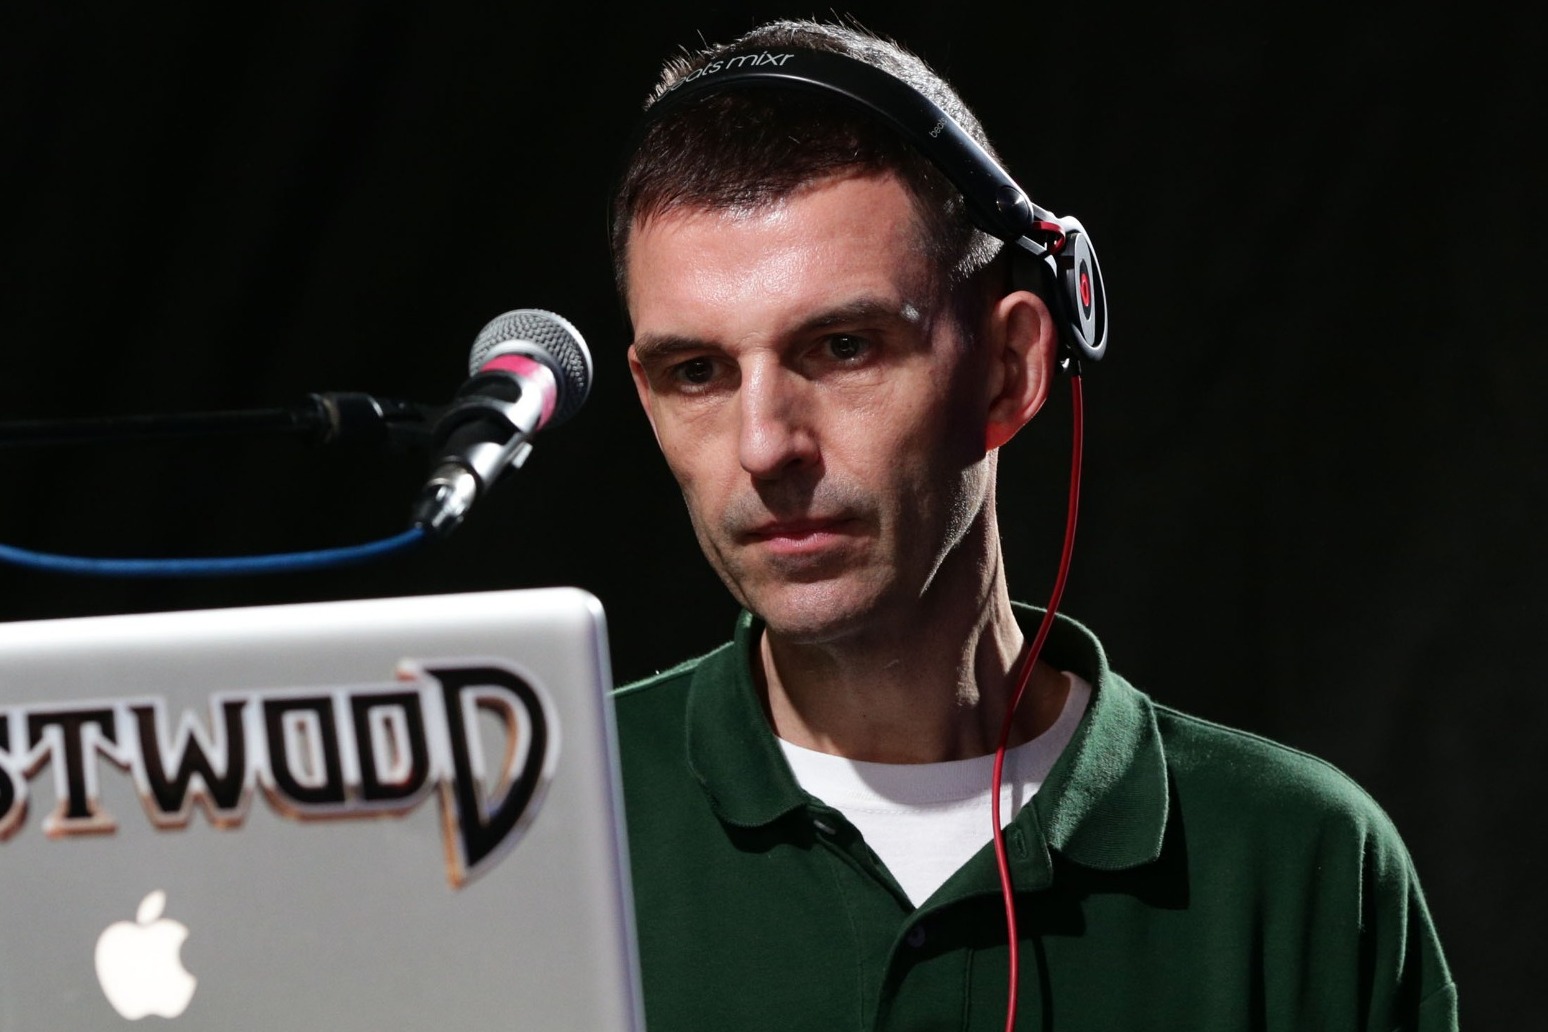 Tim Westwood steps down from radio show following sexual misconduct claims 